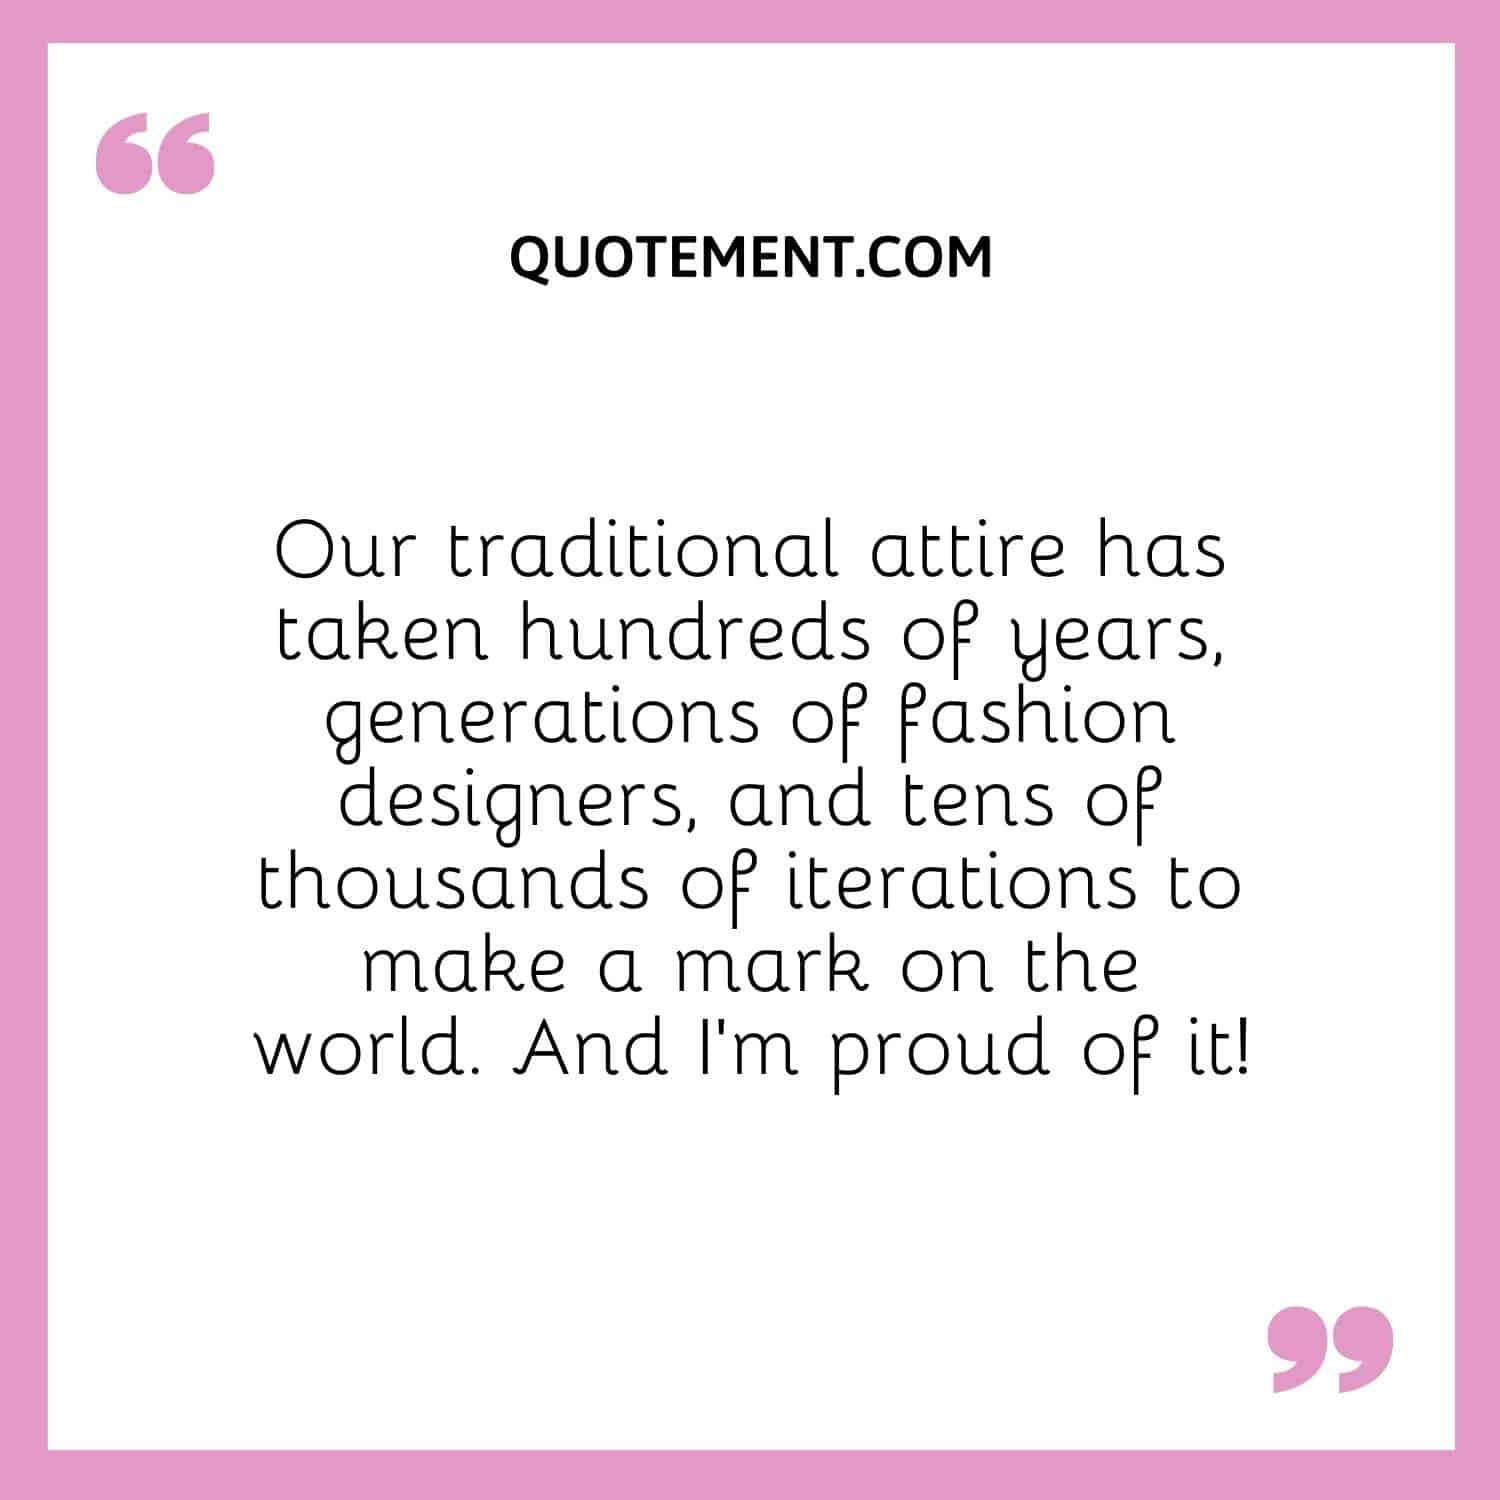 Our traditional attire has taken hundreds of years, generations of fashion designers, and tens of thousands of iterations to make a mark on the world. And I’m proud of it!